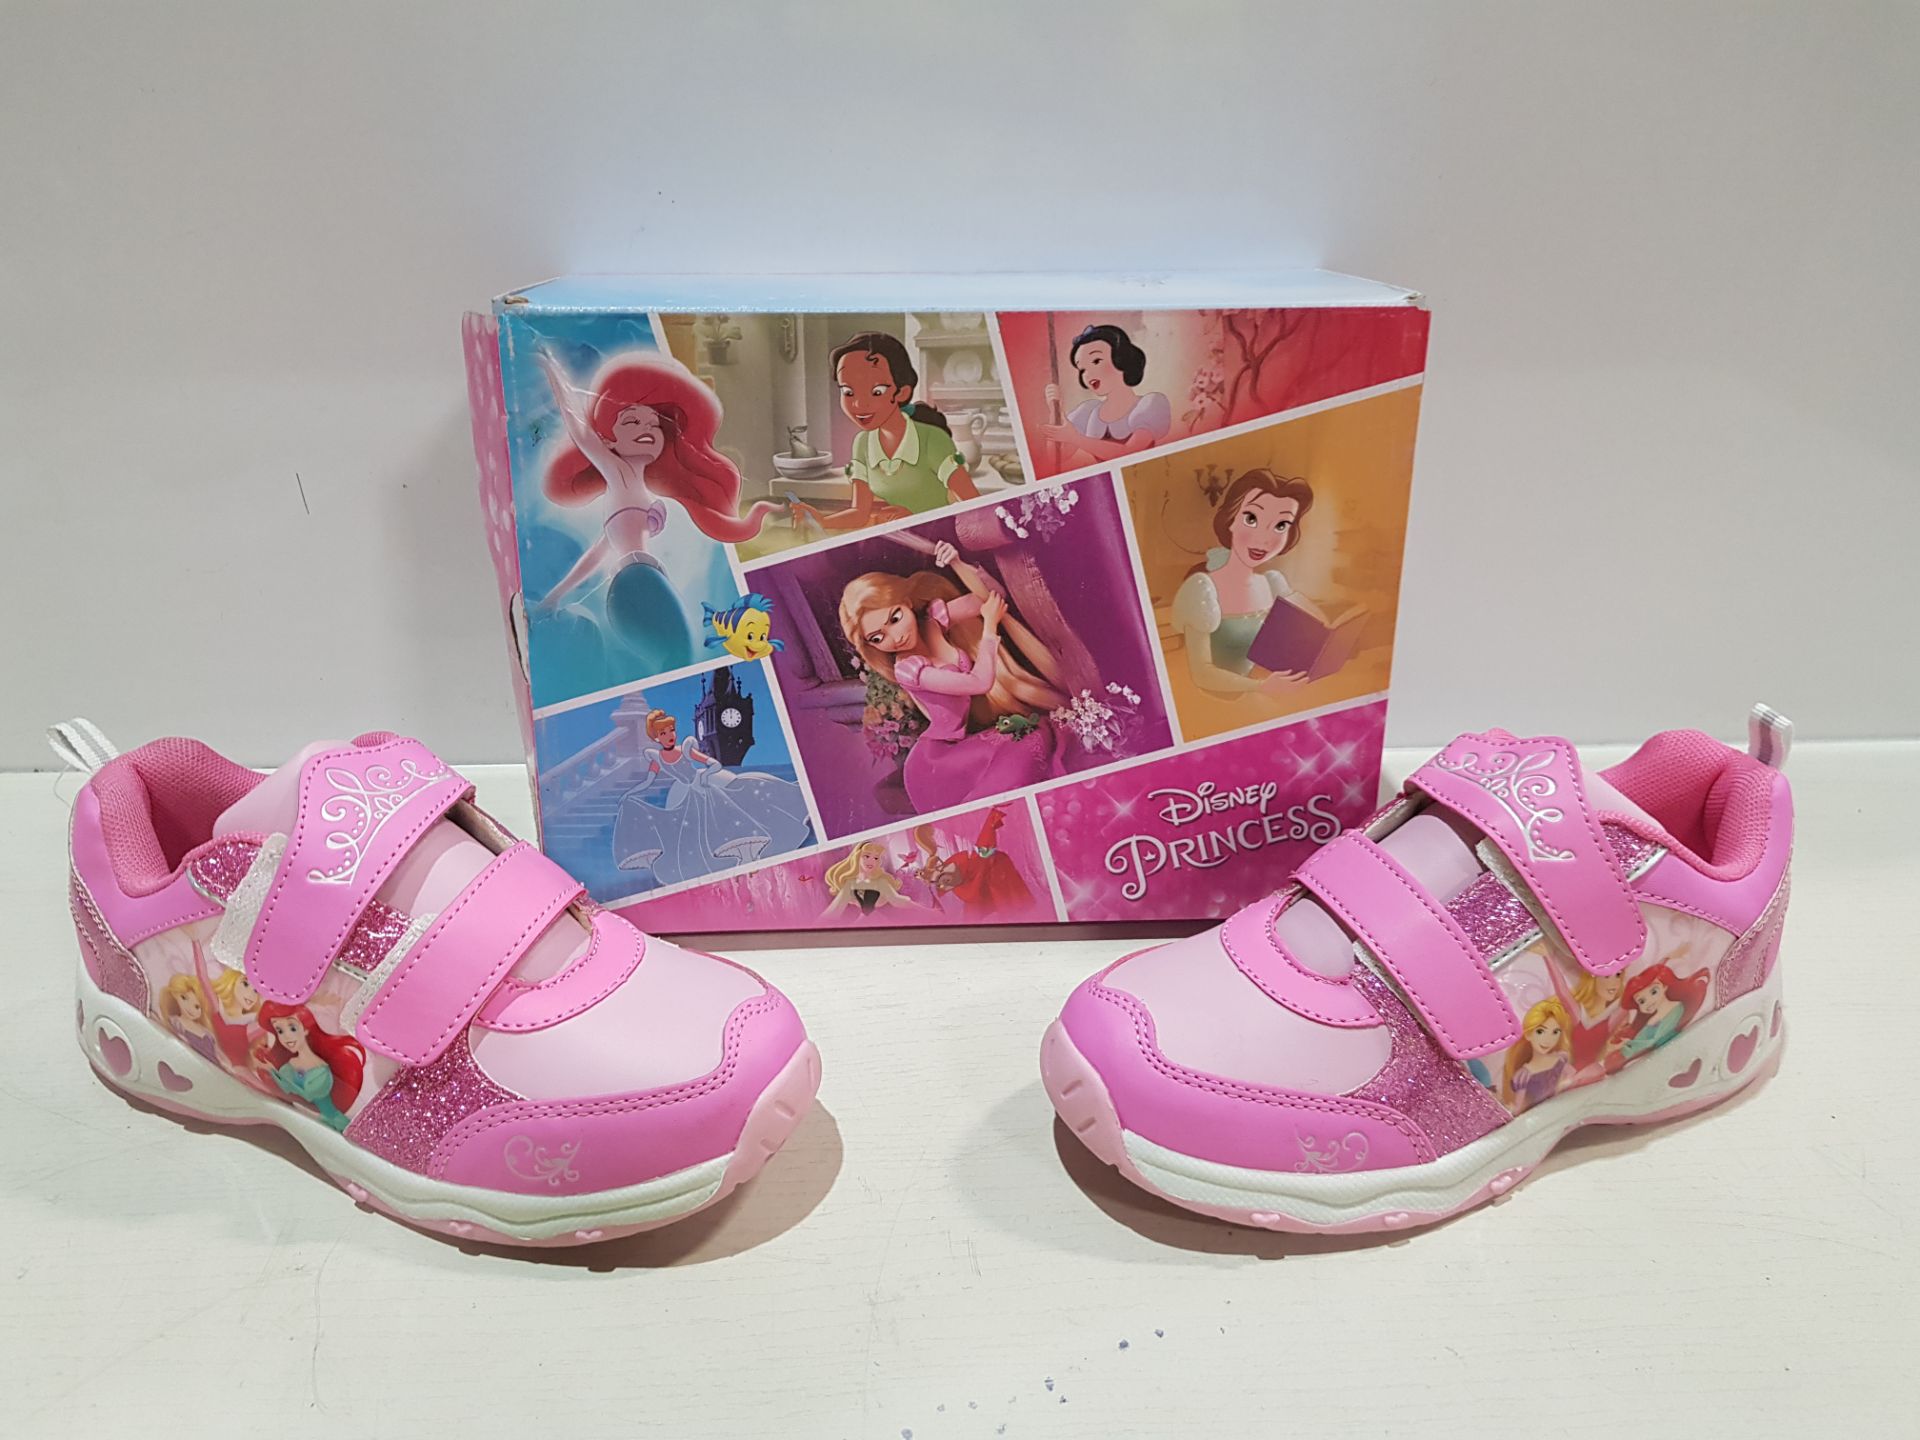 10 X BRAND NEW DISNEY PRINCESS INFANT TRAINERS IN SIZES C4, C7, UK1 (PLEASE NOTE SOME BOXES SLIGHTLY